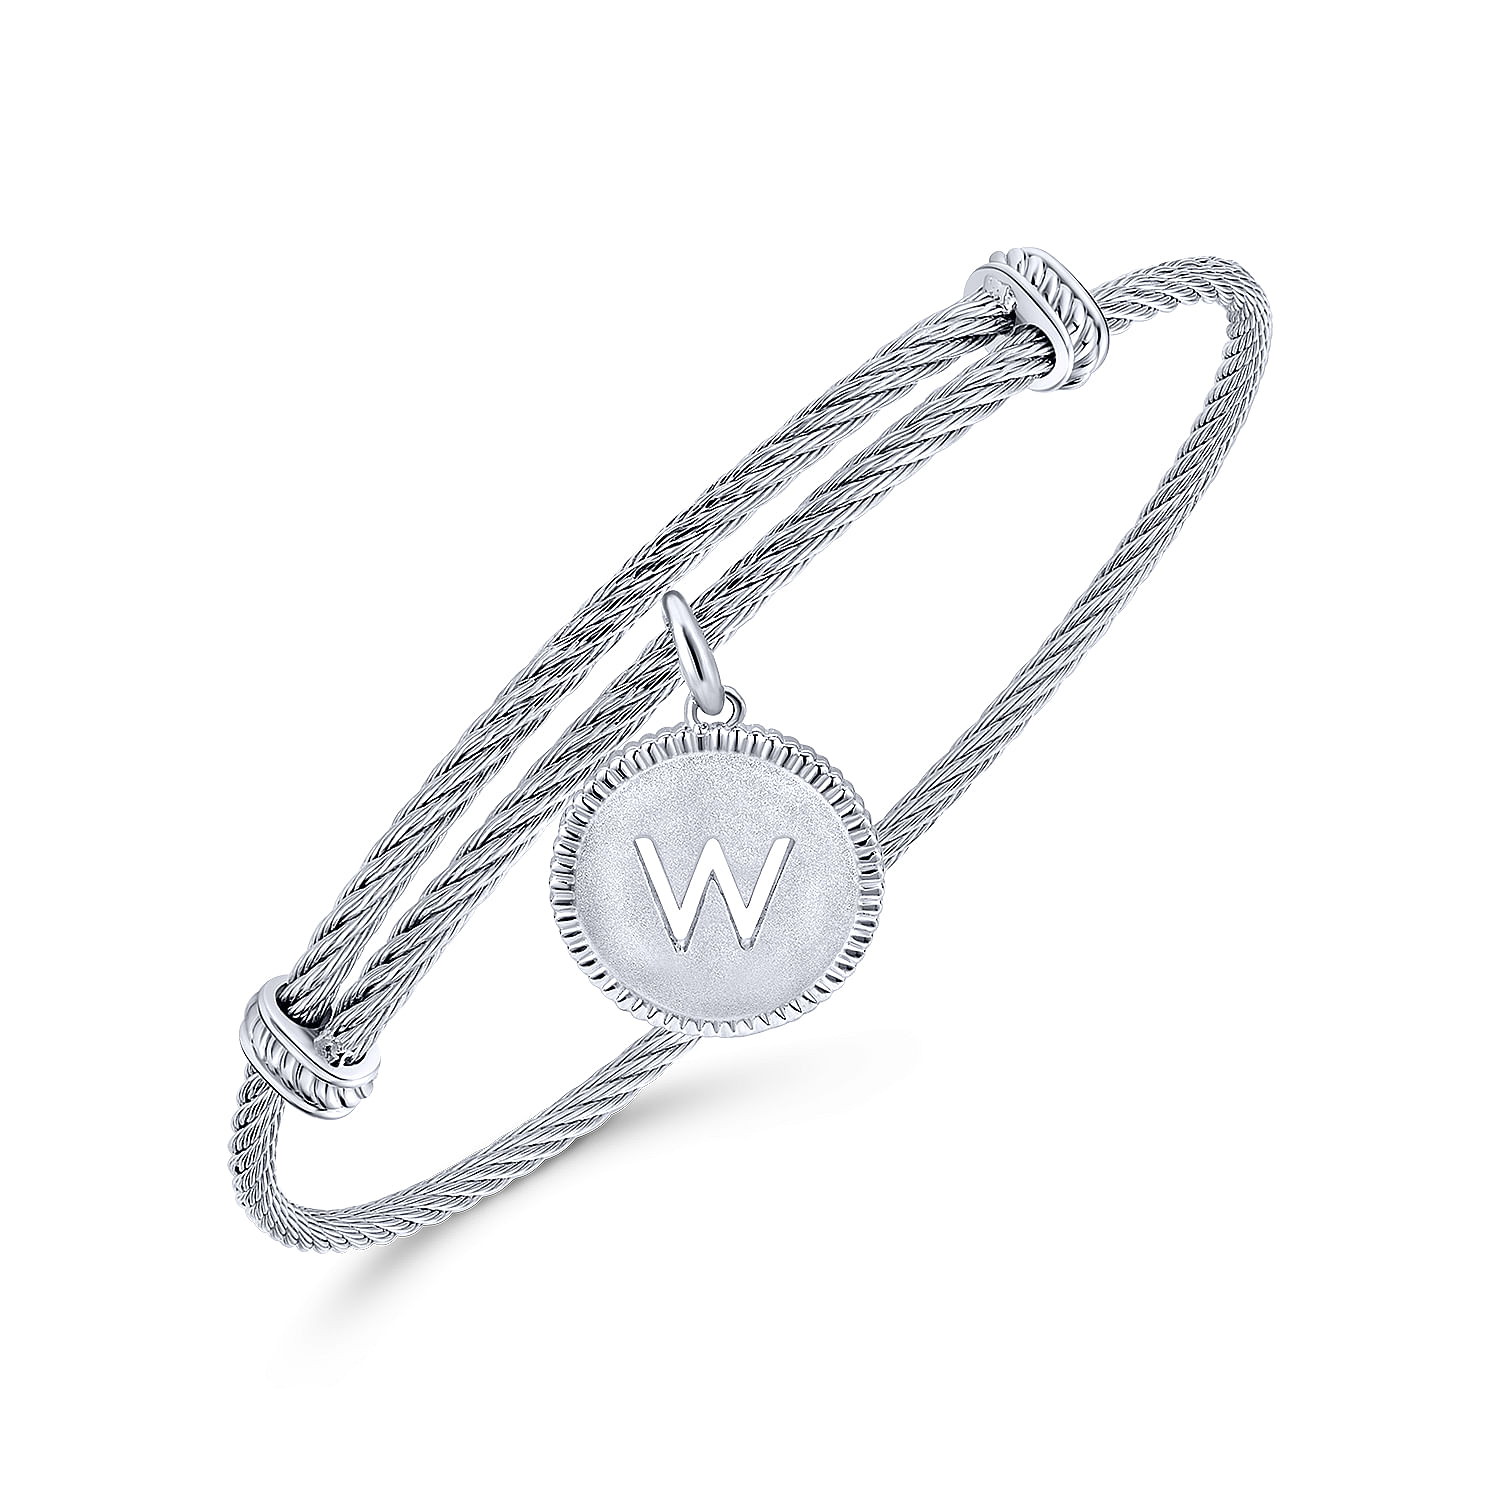 Adjustable Twisted Cable Stainless Steel Bangle with Sterling Silver W Initial Charm